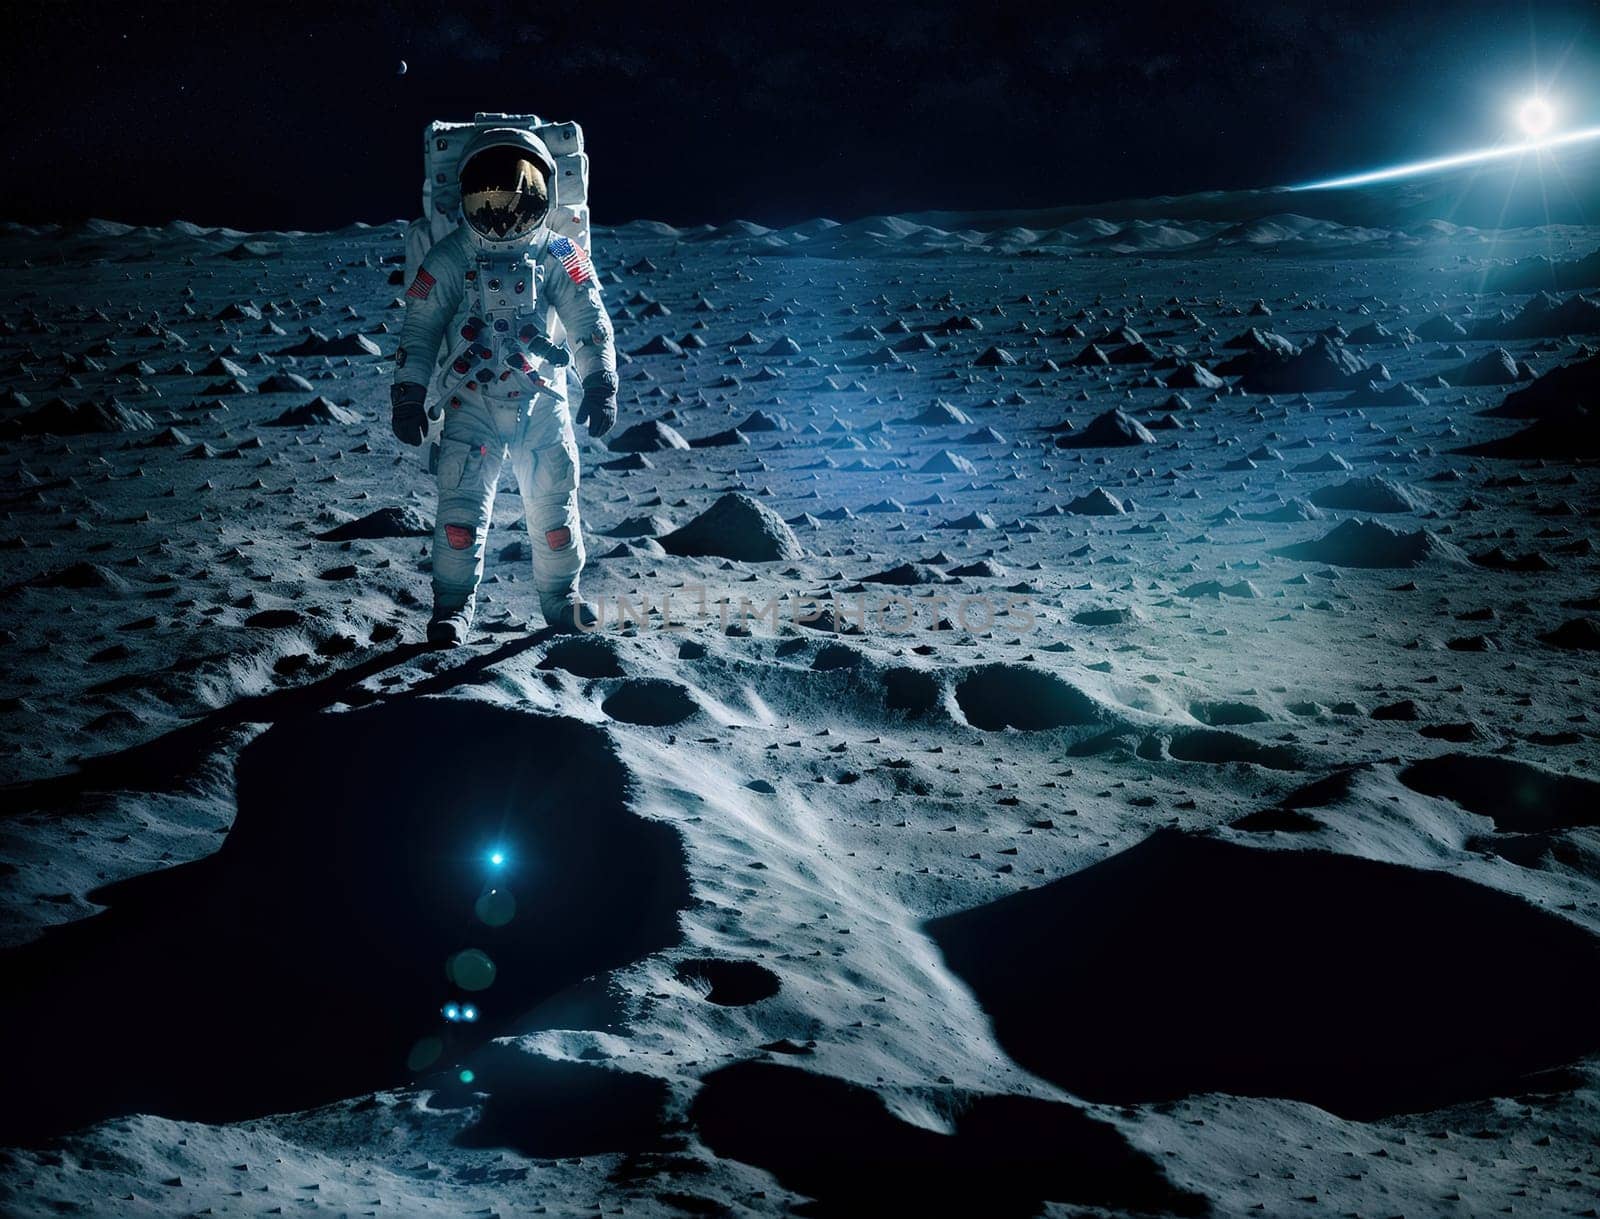 The image shows a person standing on the surface of the moon, looking up at the sky.